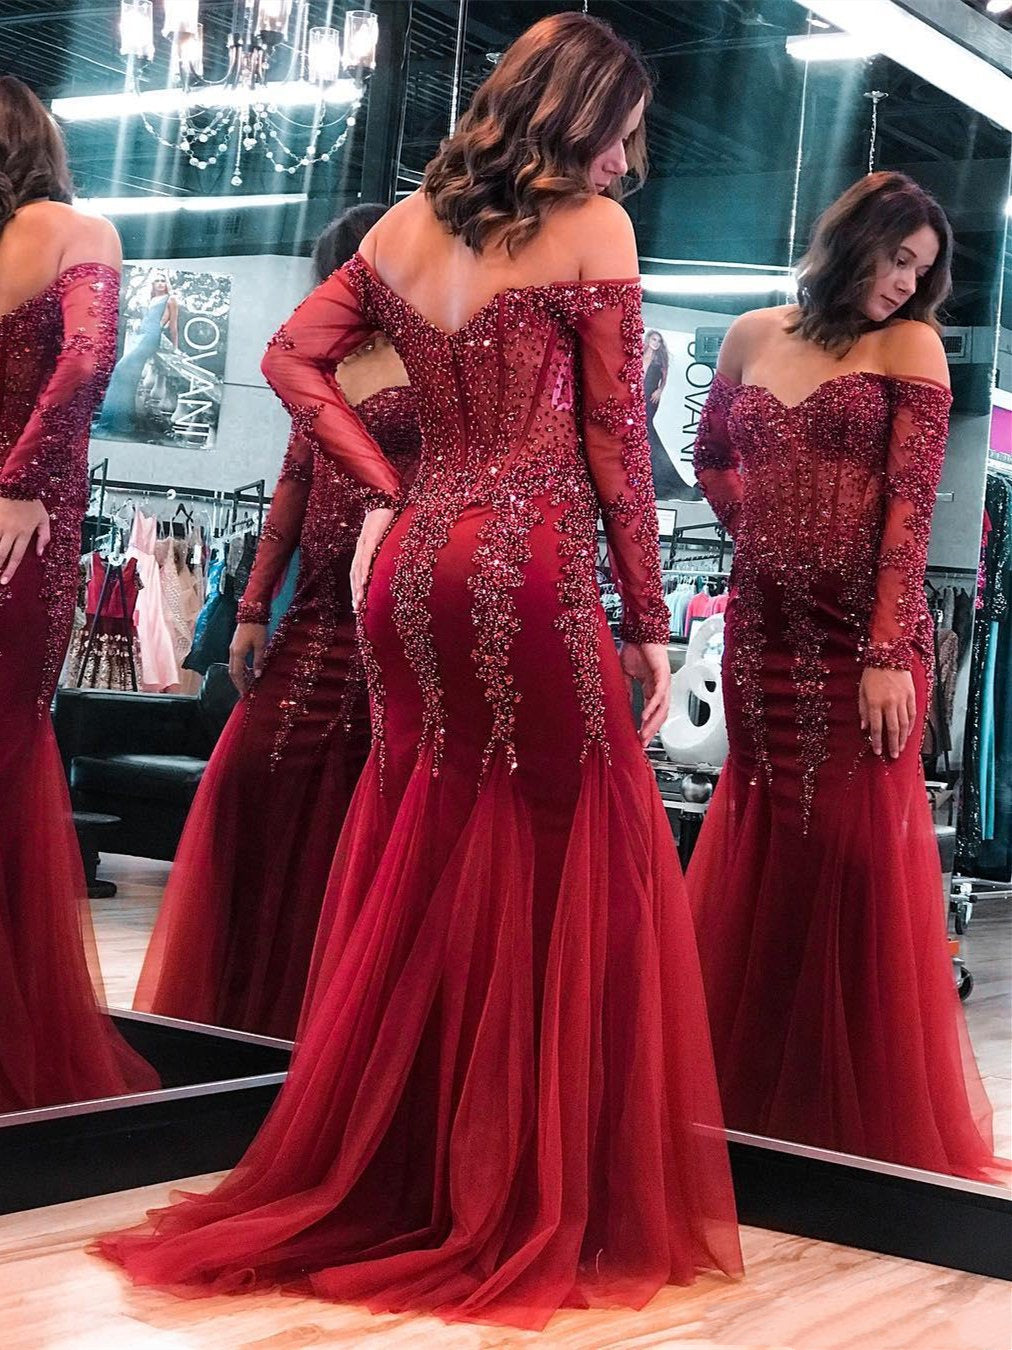 SP1692,Long Red Prom Dresses Long Sleeves Mermaid Open Back Formal Gown ·  SofieProm · Online Store Powered by Storenvy